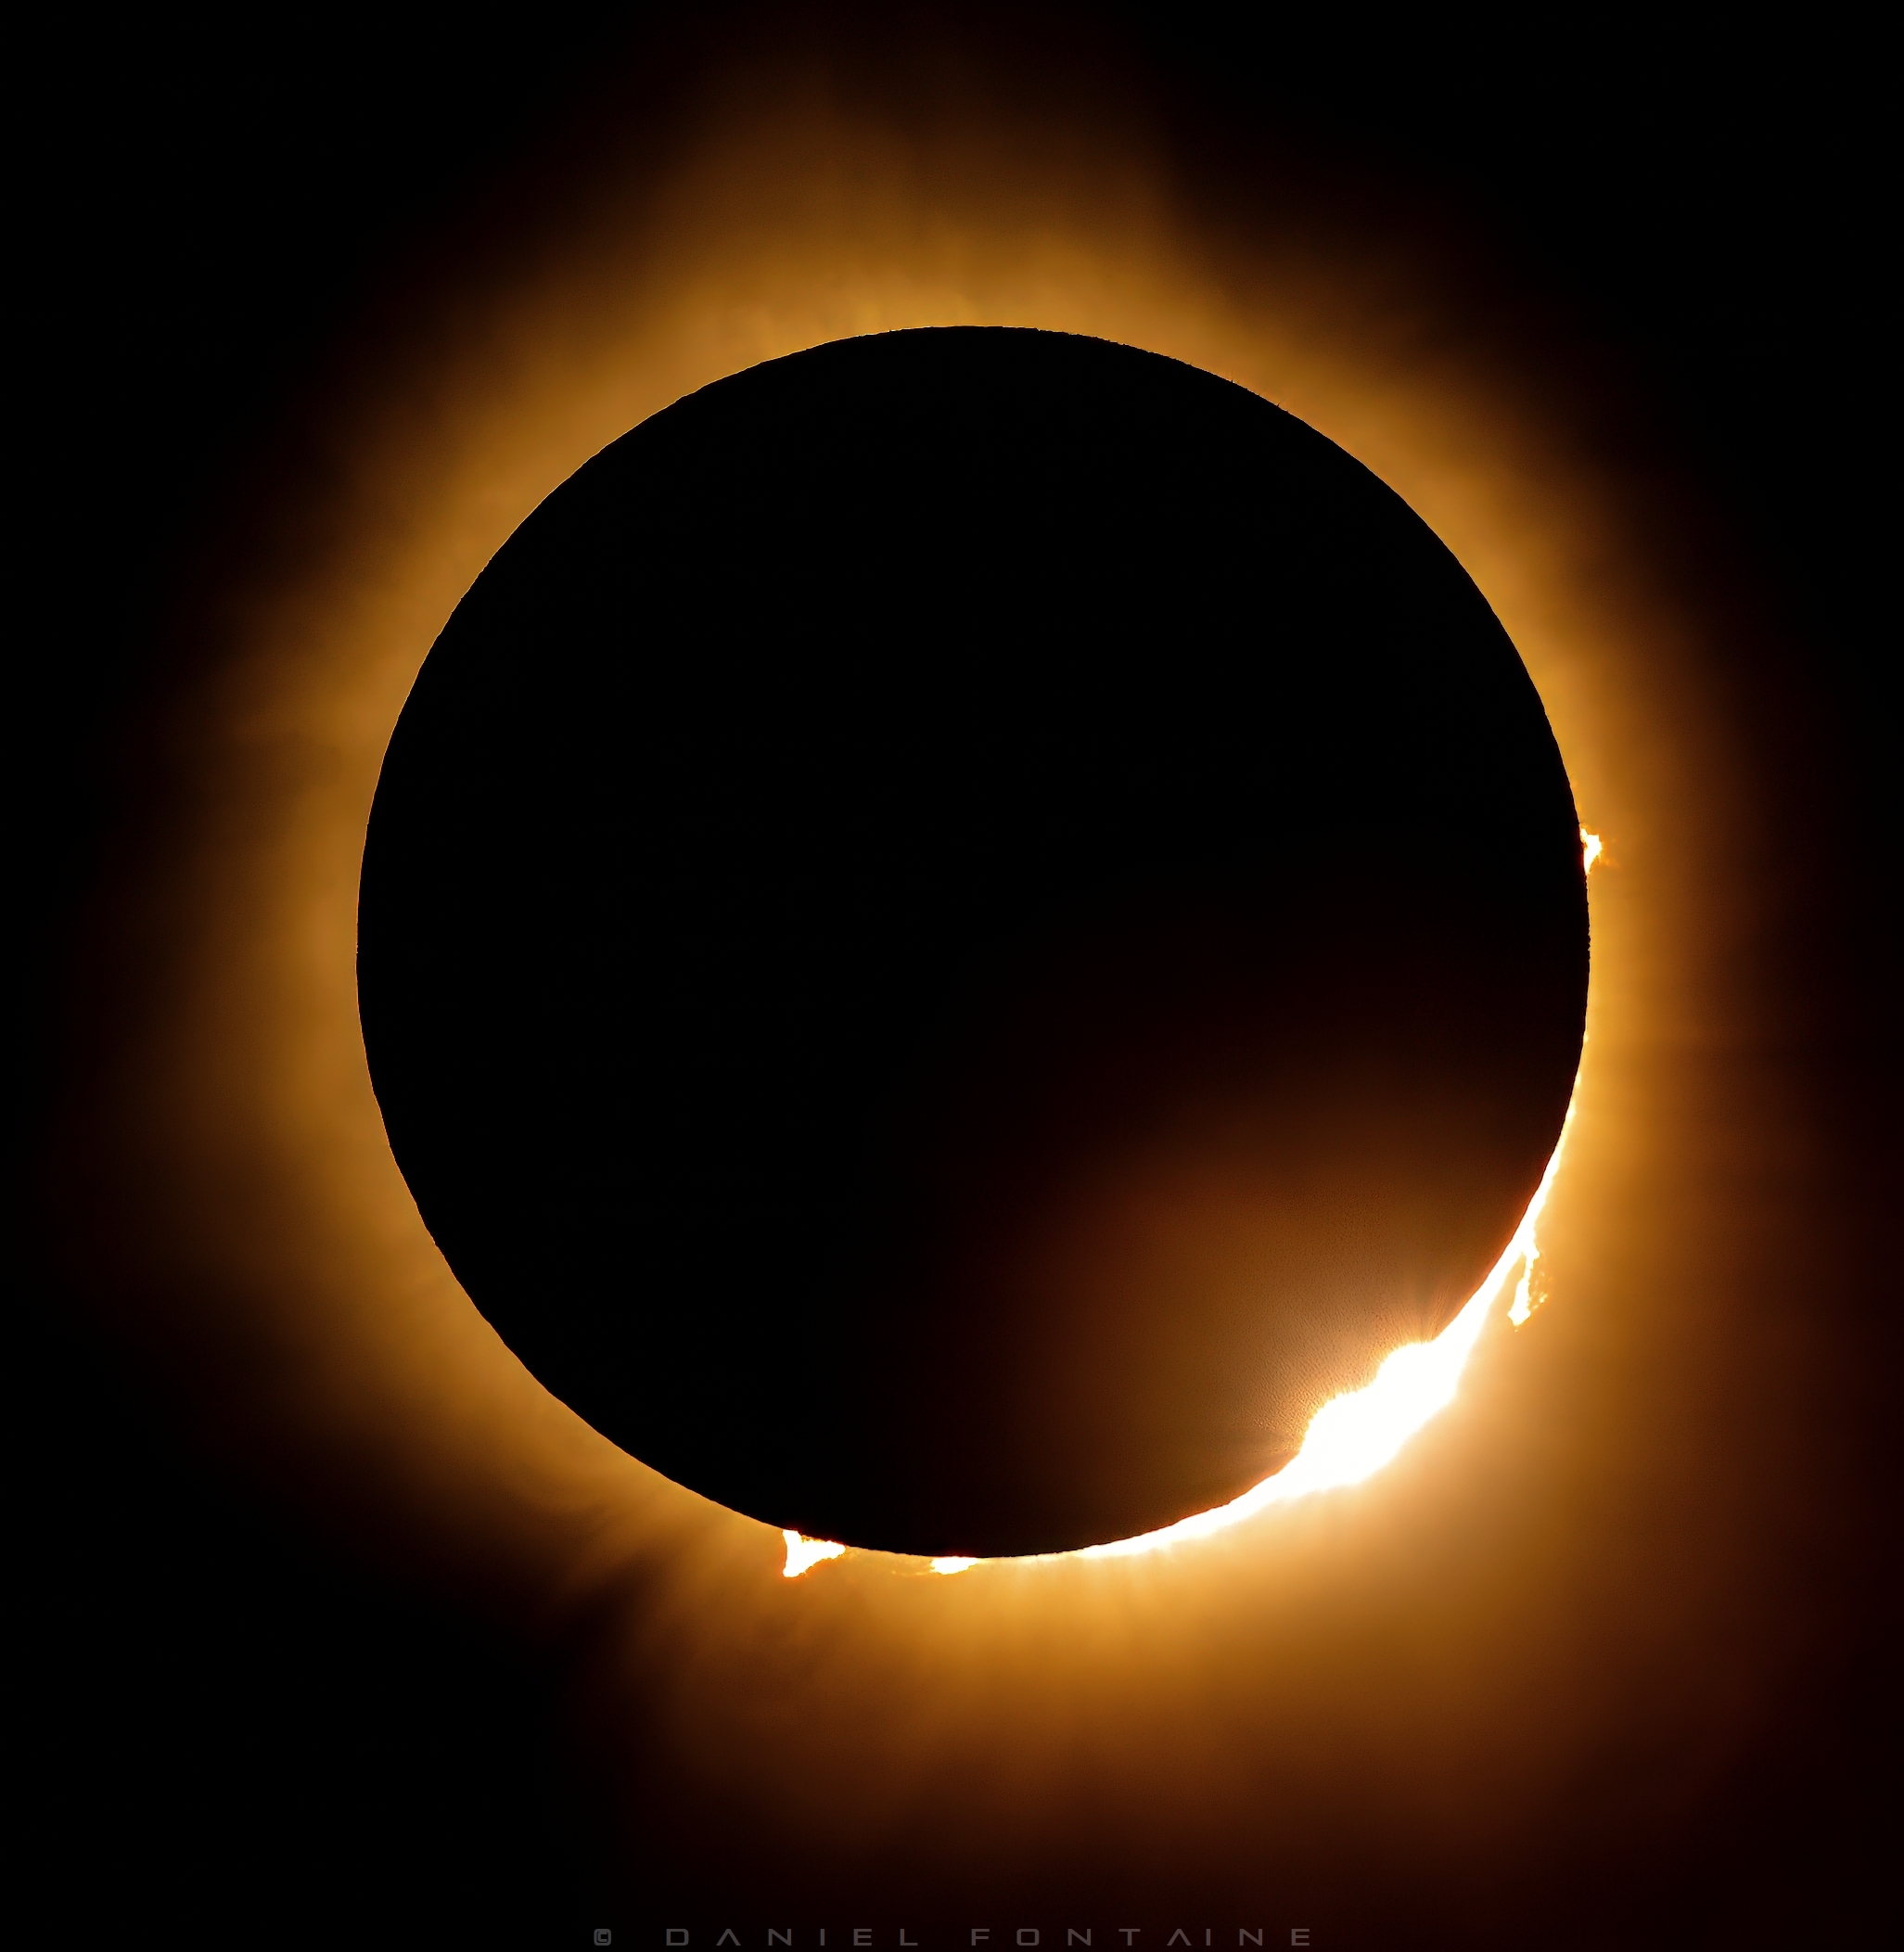 Relive the “buzz” of a solar eclipse in pictures